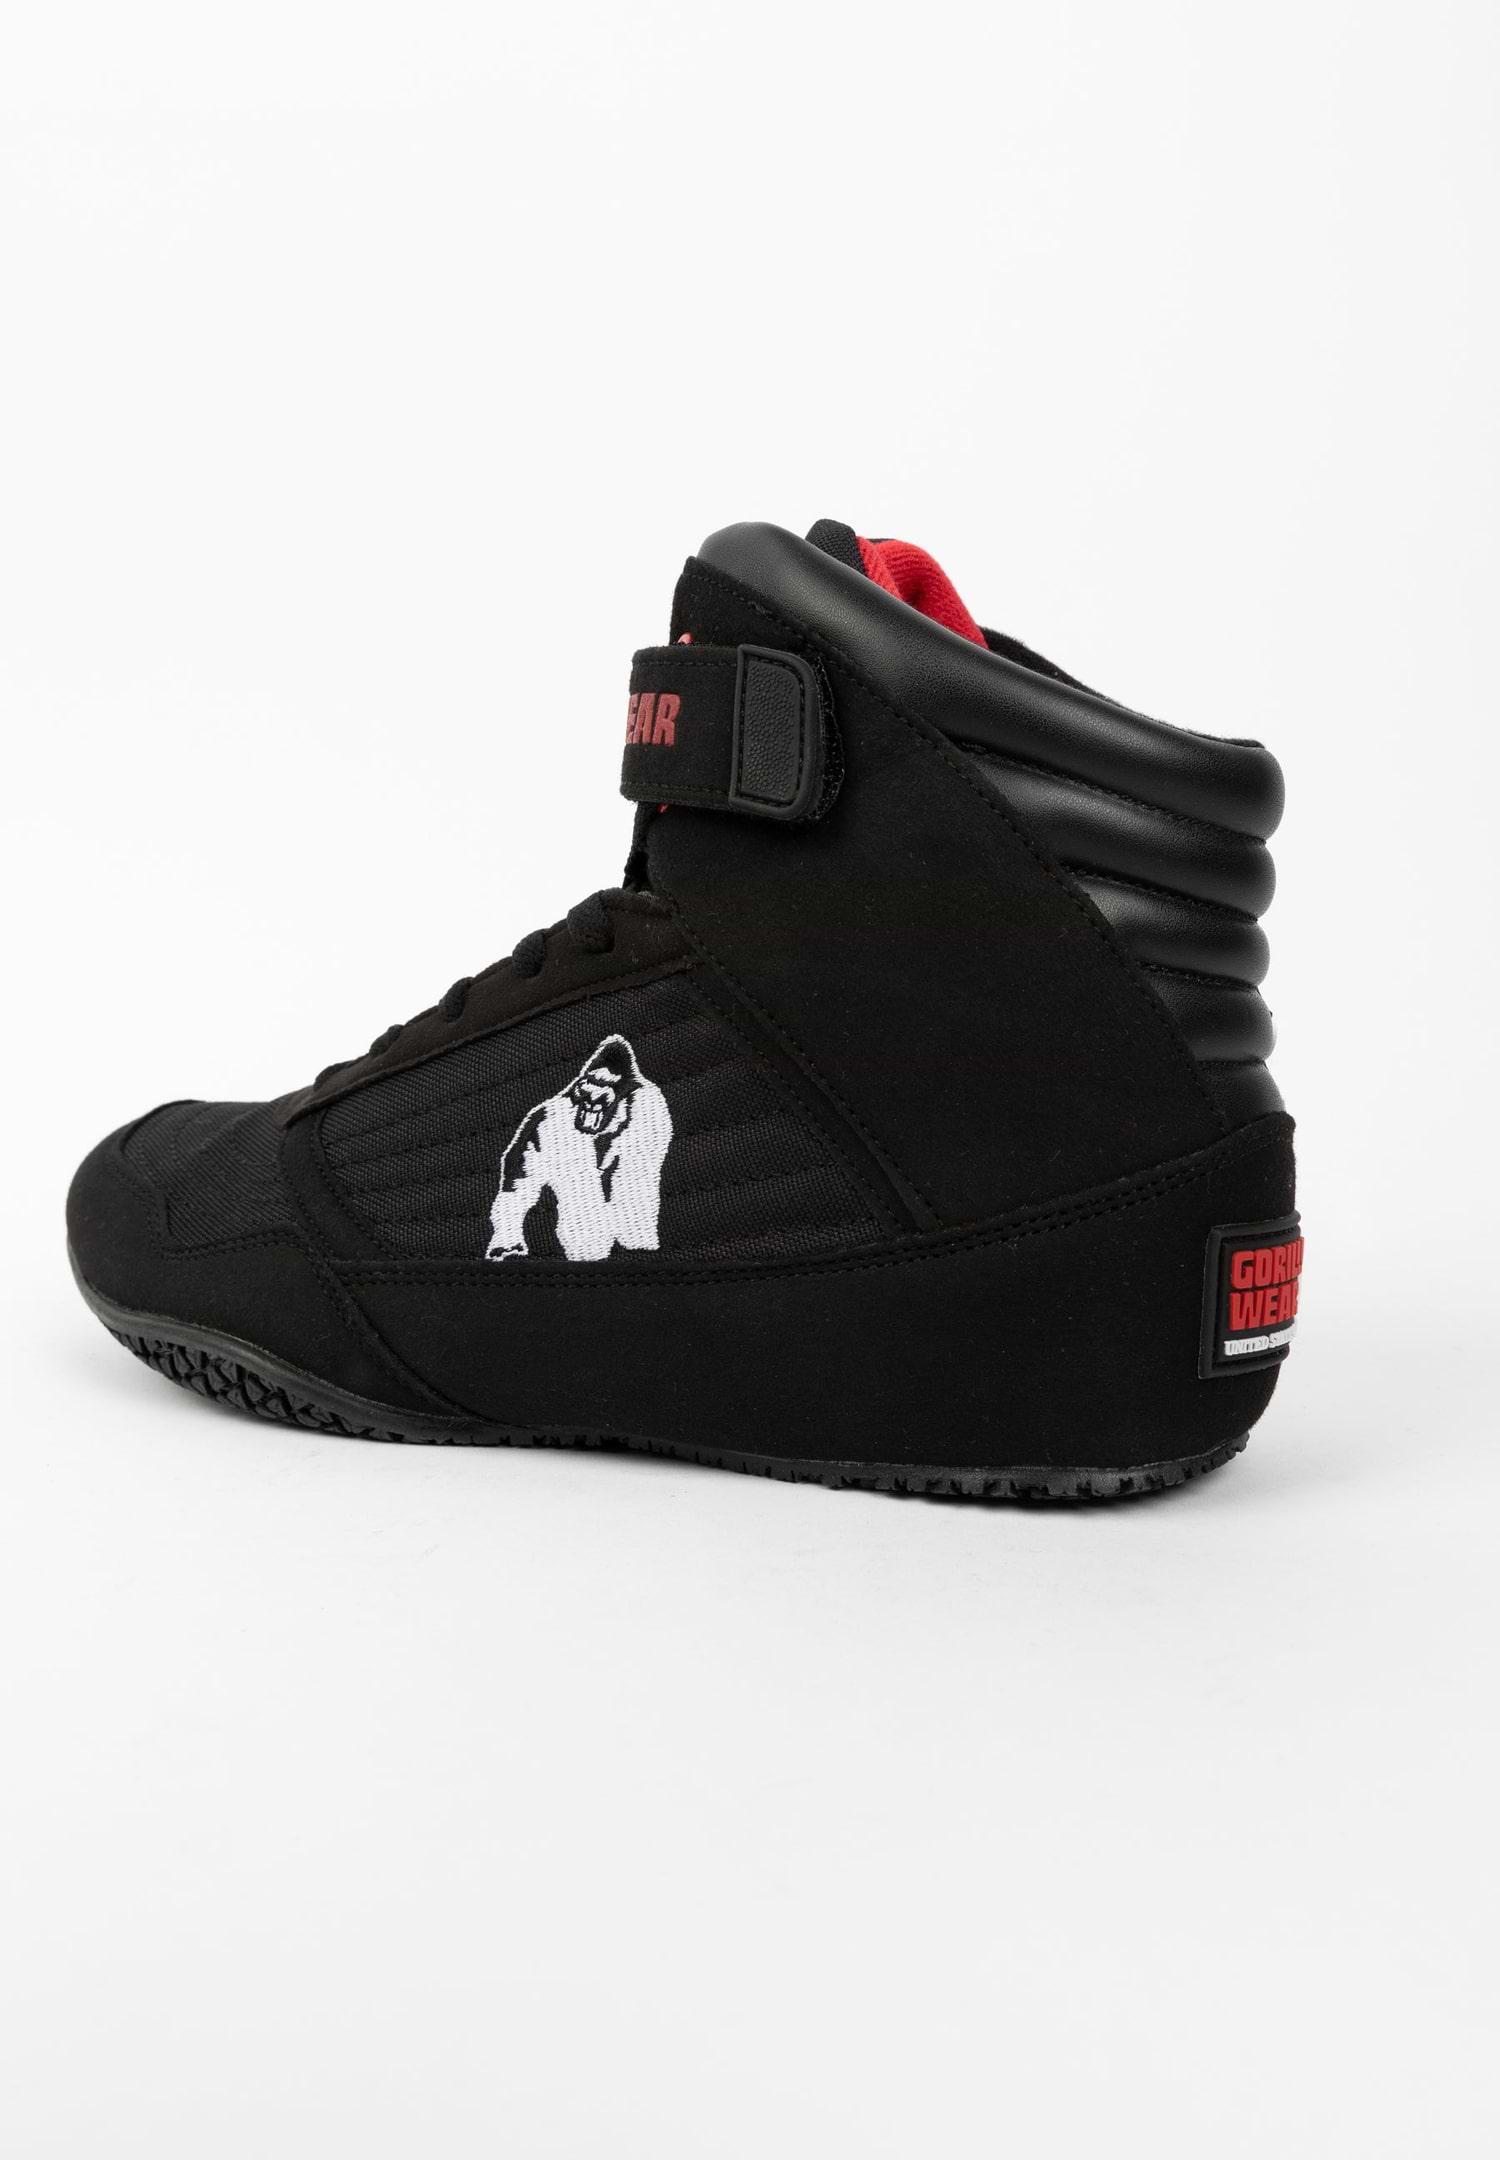 Gorilla Wear High Shoes, Men's Fitness Shoes, Red & Black : :  Fashion